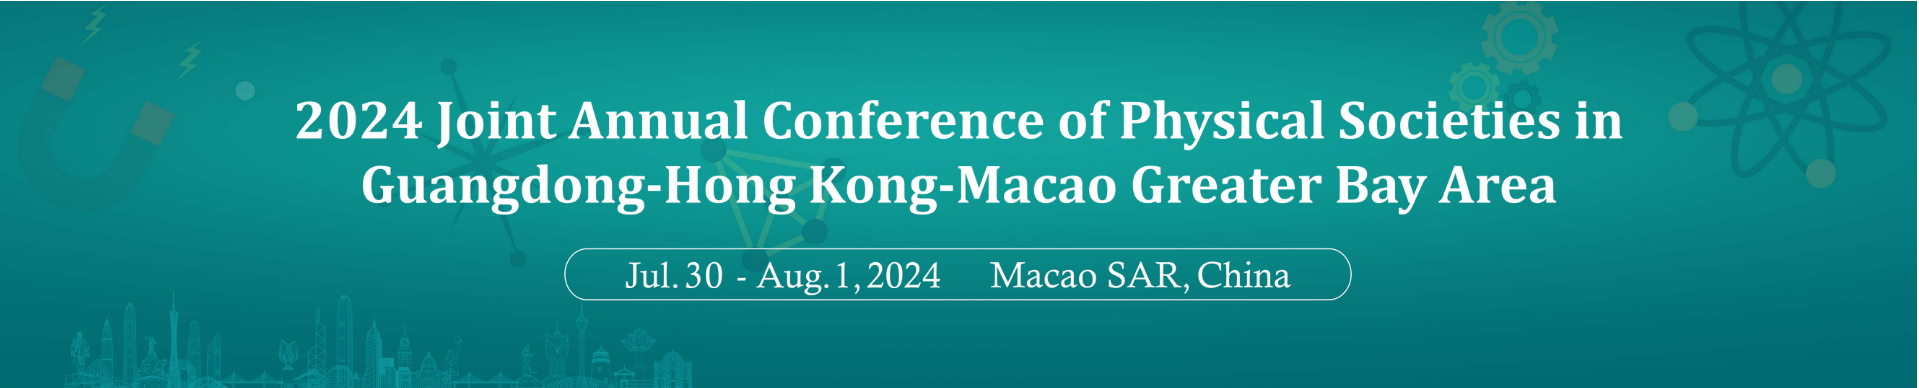 2024 Joint Annual Conference of Physical Societies in Guangdong-Hong Kong-Macao Greater Bay Area